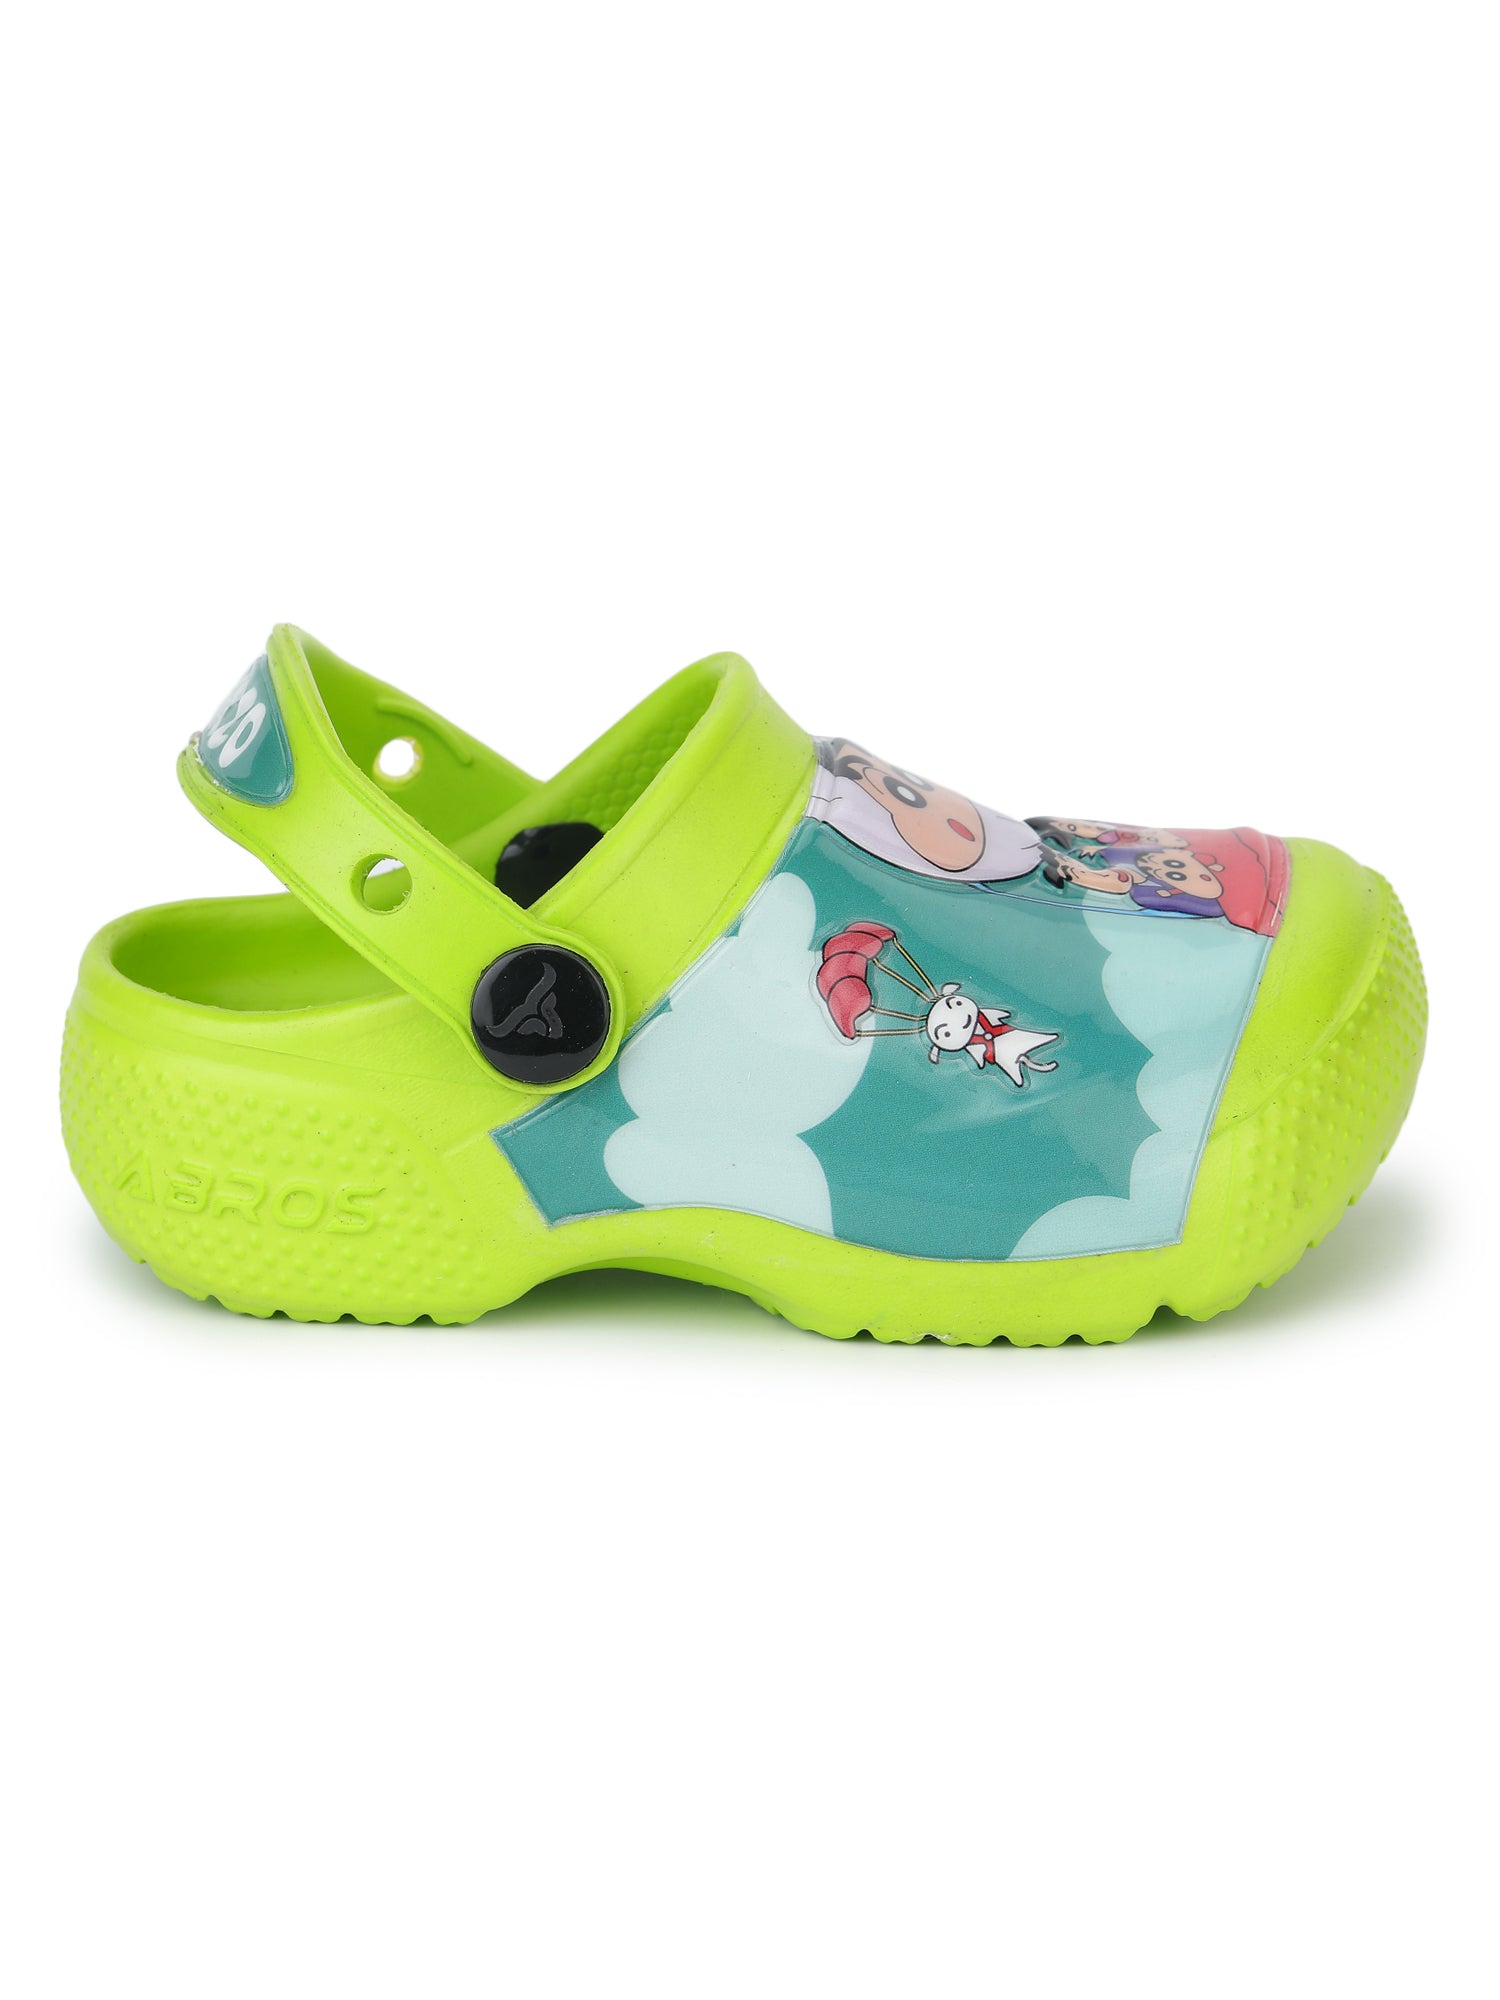 ZCK-0902 CLOGS FOR KIDS